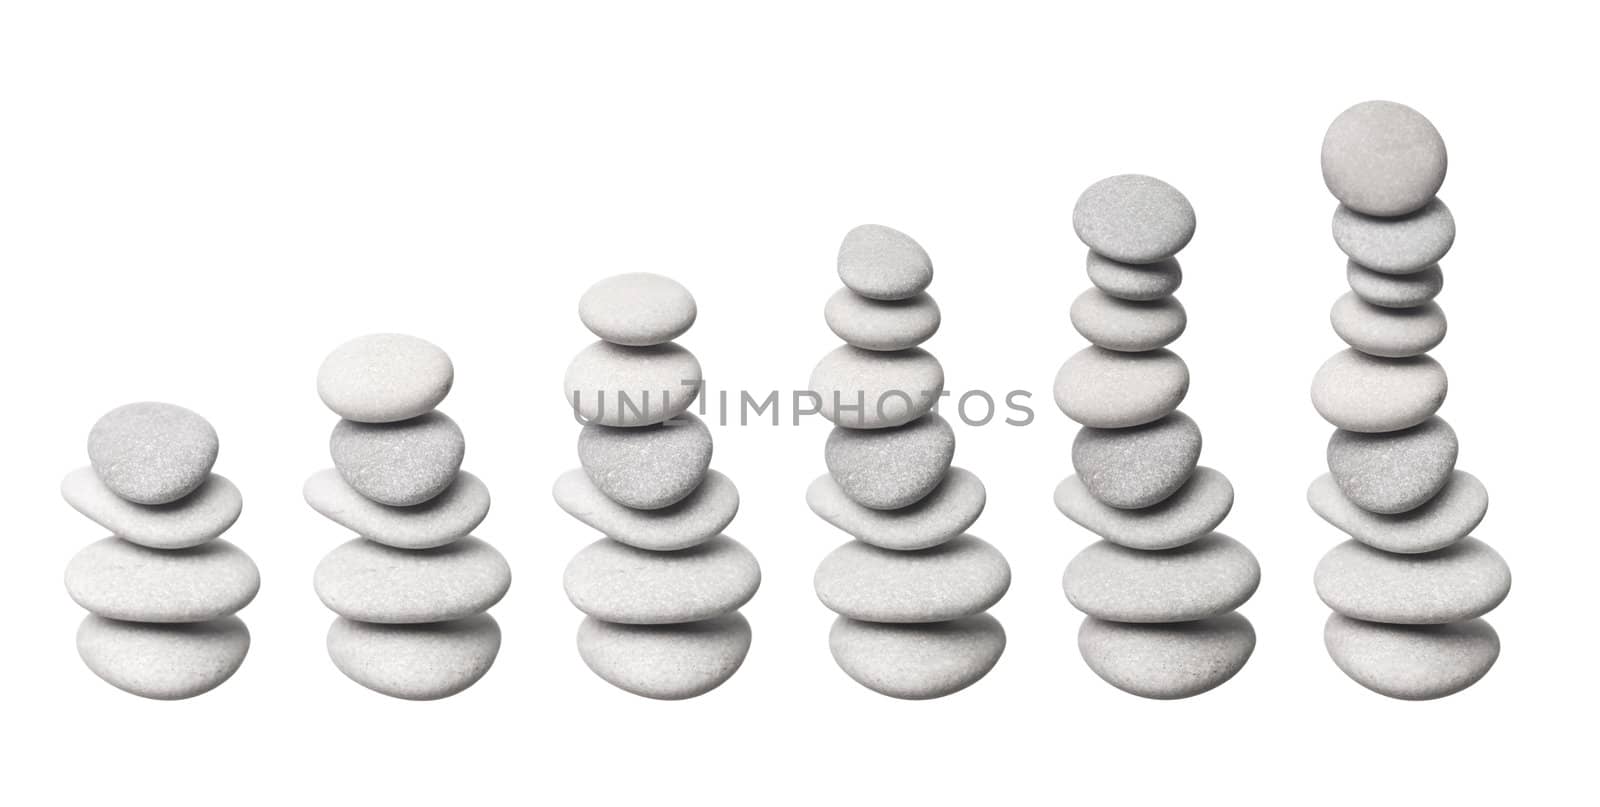 Stacked stones in progress, isolated on white background